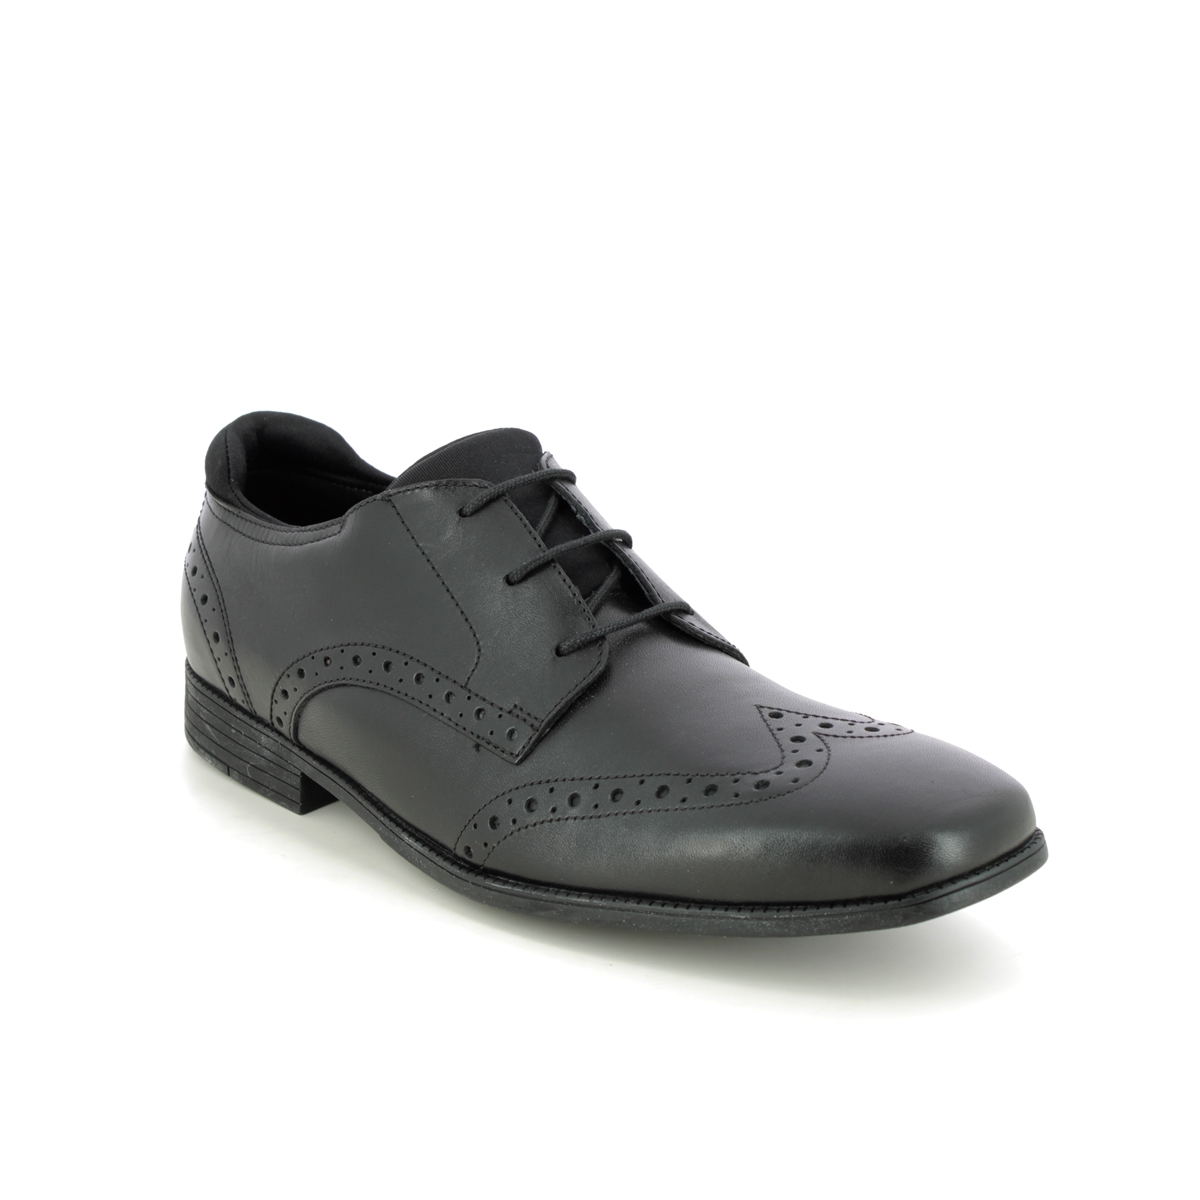 Start Rite - Tailor In Black Leather 3513-76F In Size 6 In Plain Black Leather For School Boys Shoes  In Black Leather For kids